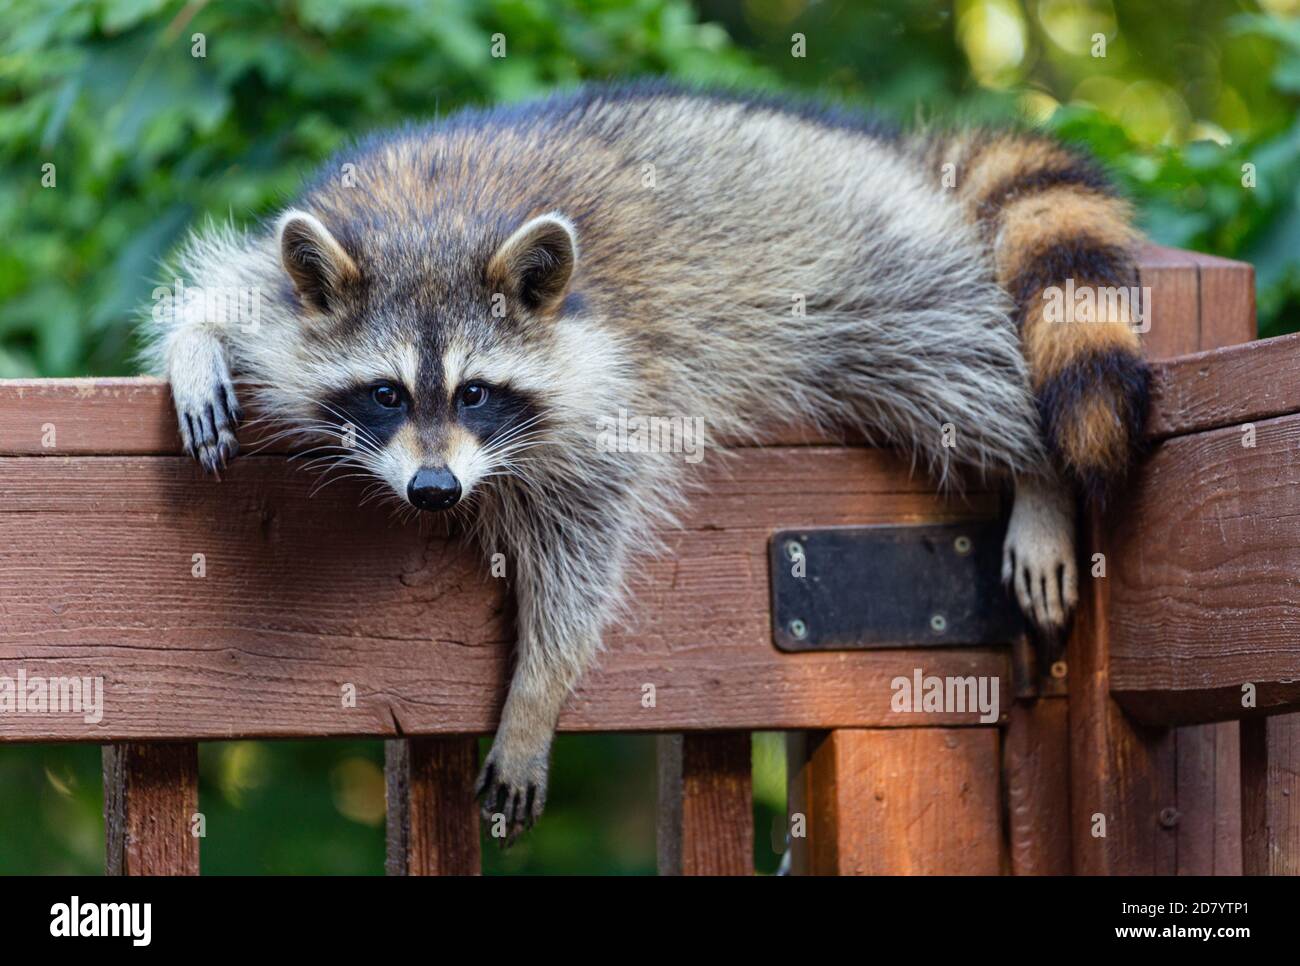 One young raccoon draped on a rustic wood railing looking at camera. Stock Photo